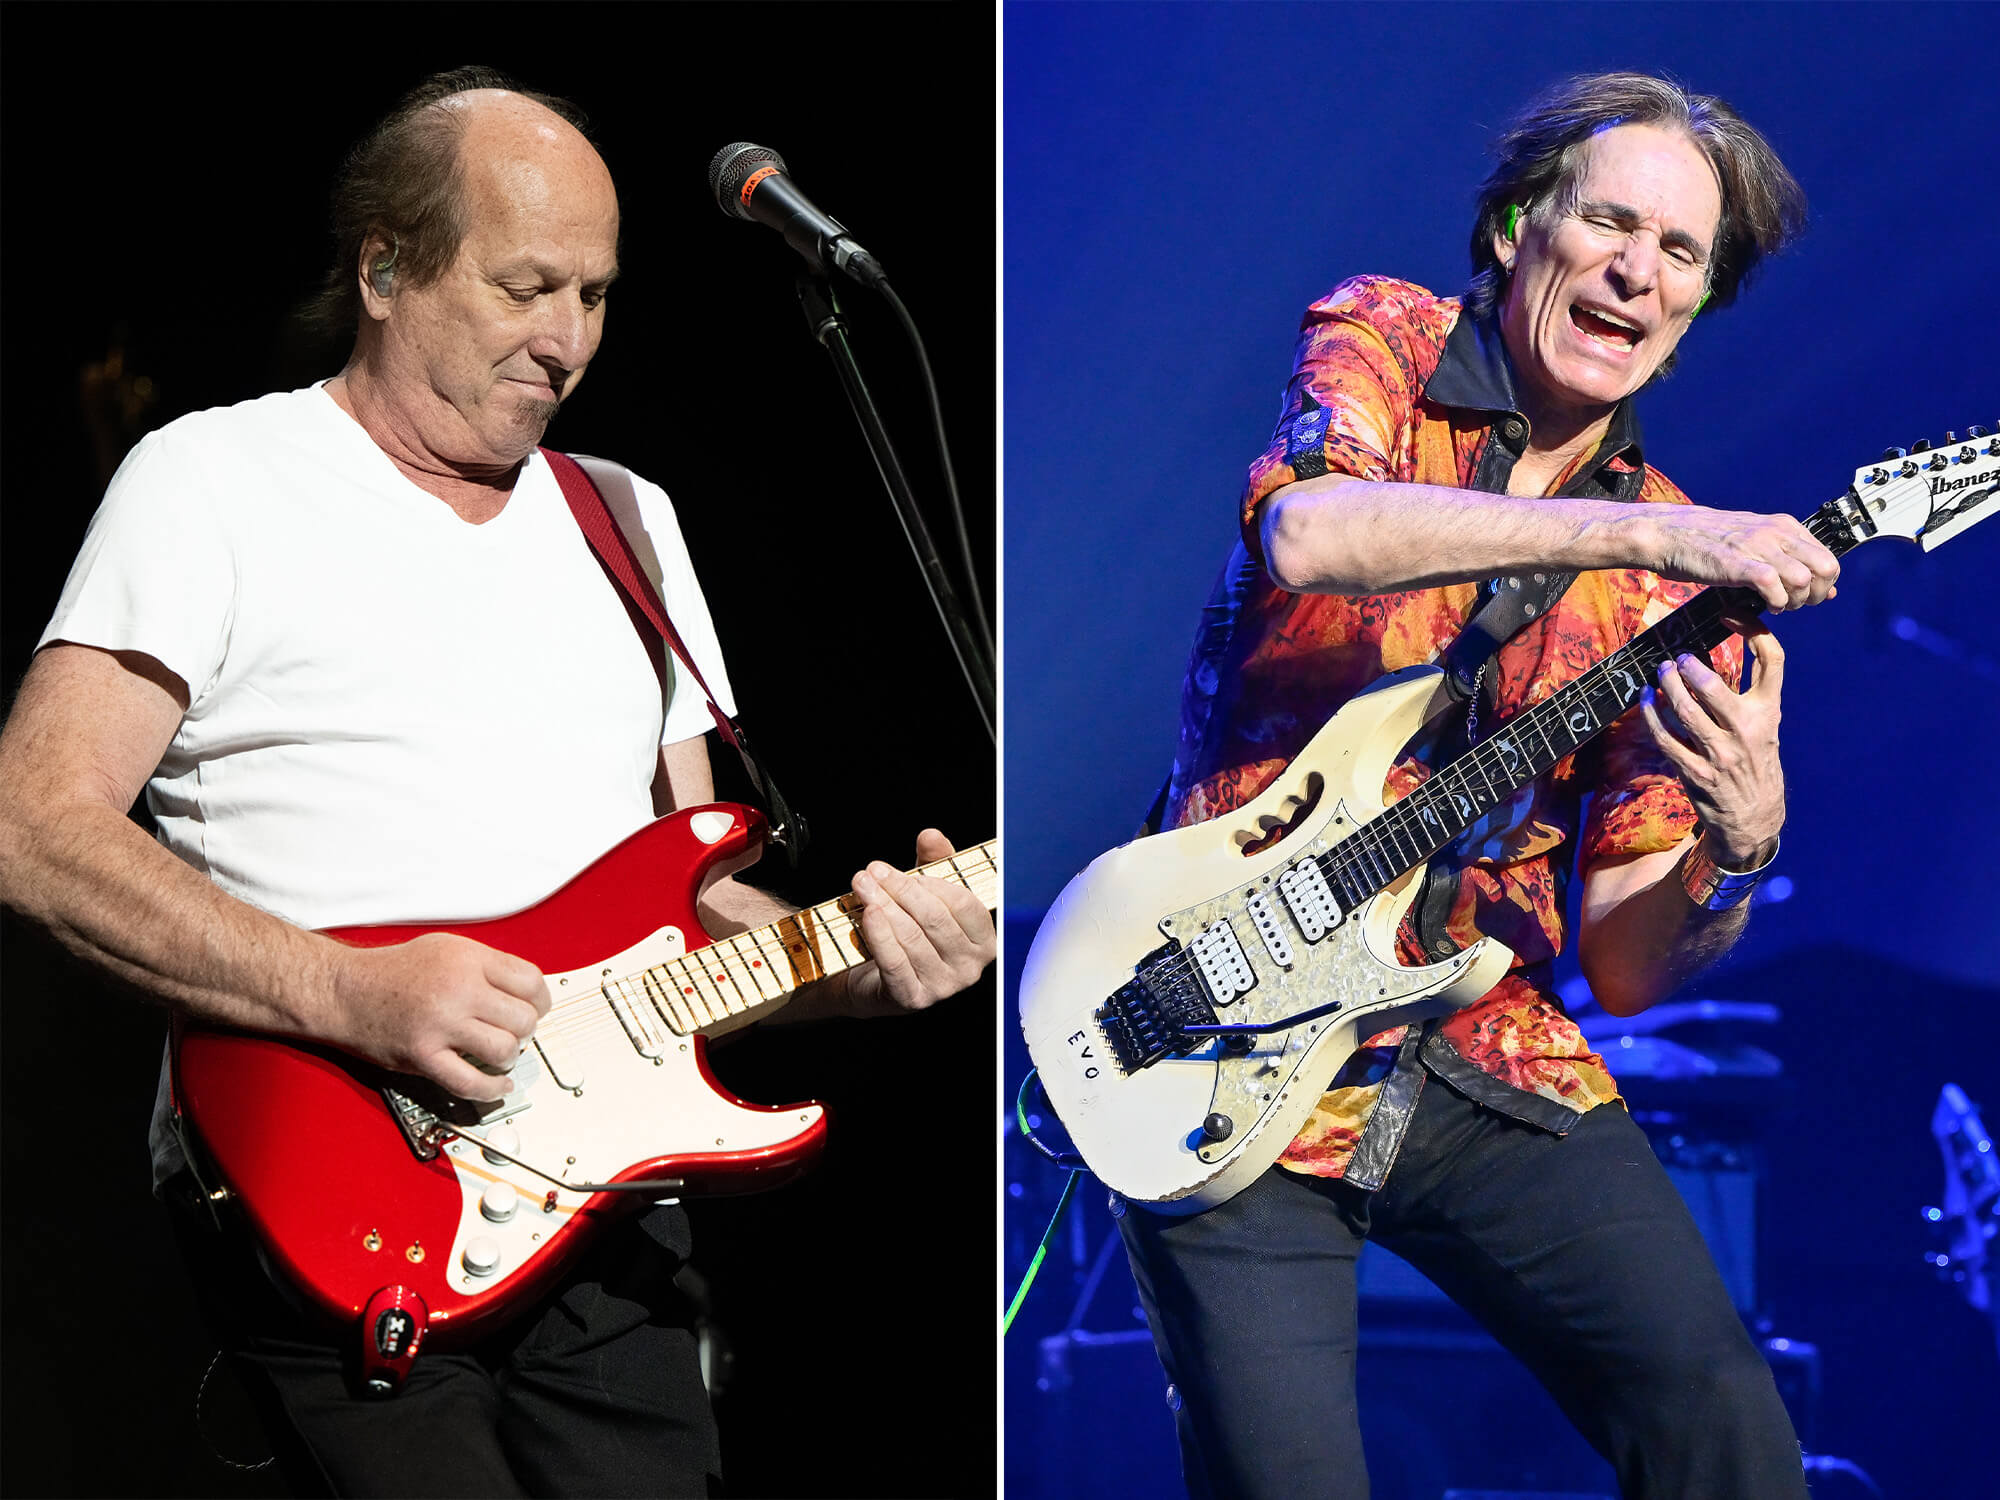 Adrian Belew playing a red Strat (left) and Steve Vai pictured playing an Ibanez, with both hands high up on the fretboard (right).